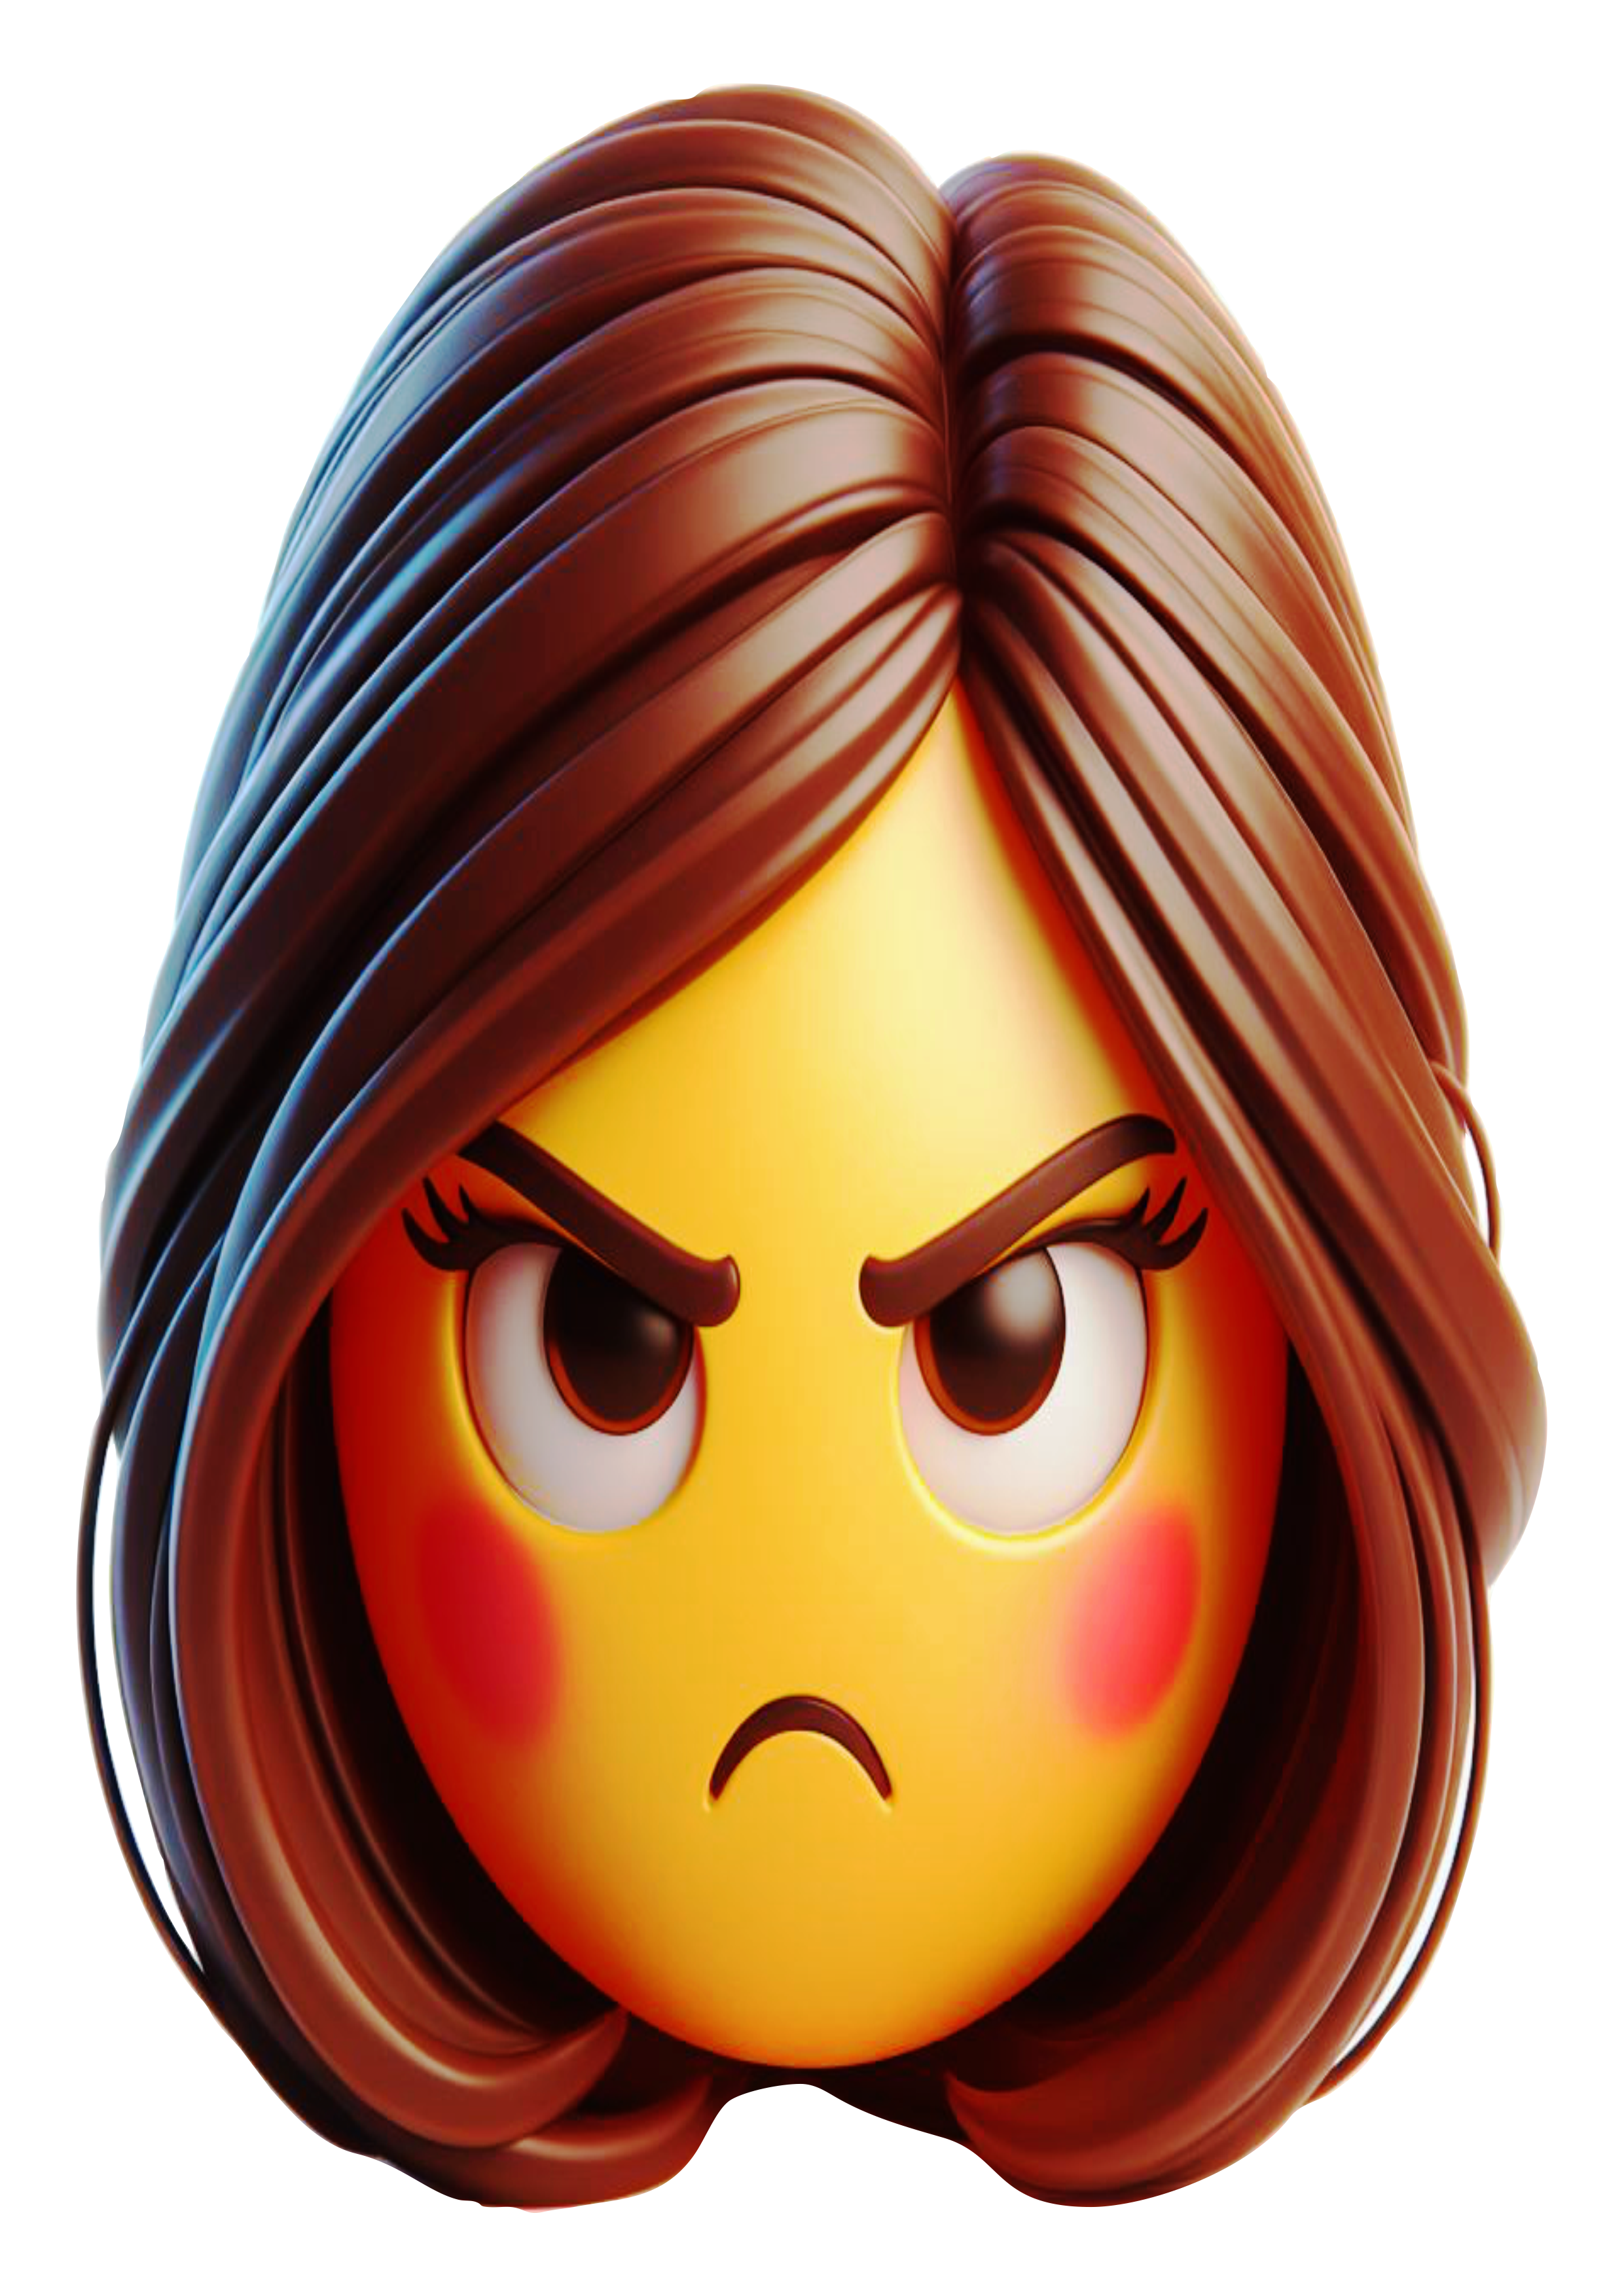 Emoticon Angry Woman Emojis Free PNG Transparent Background Clipart Vector